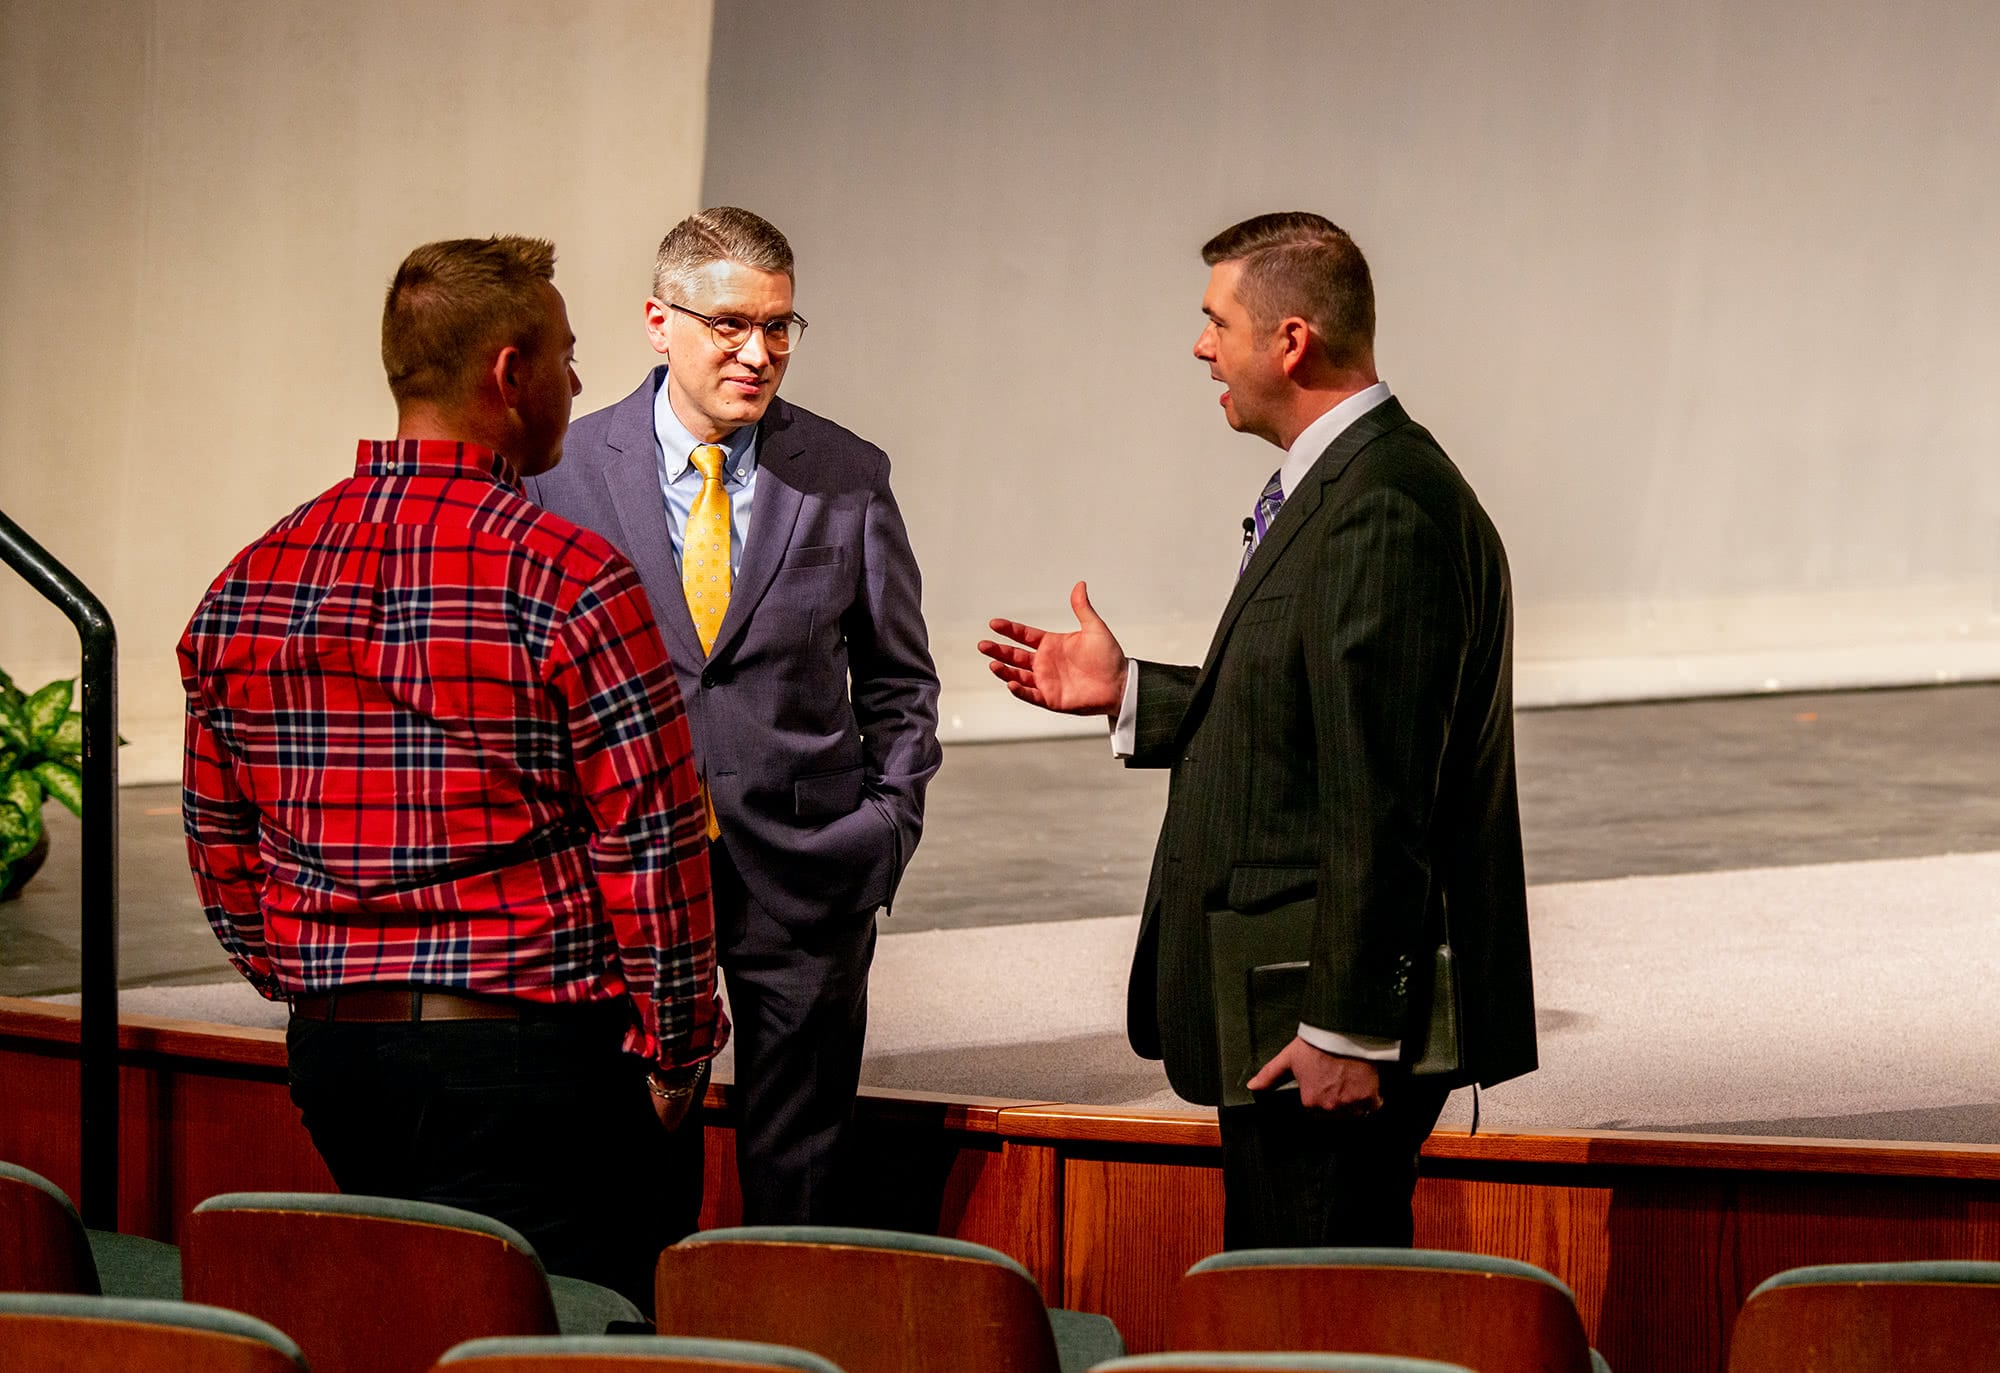 Dr. Folger speaking with Dr. Rushing and ministerial student